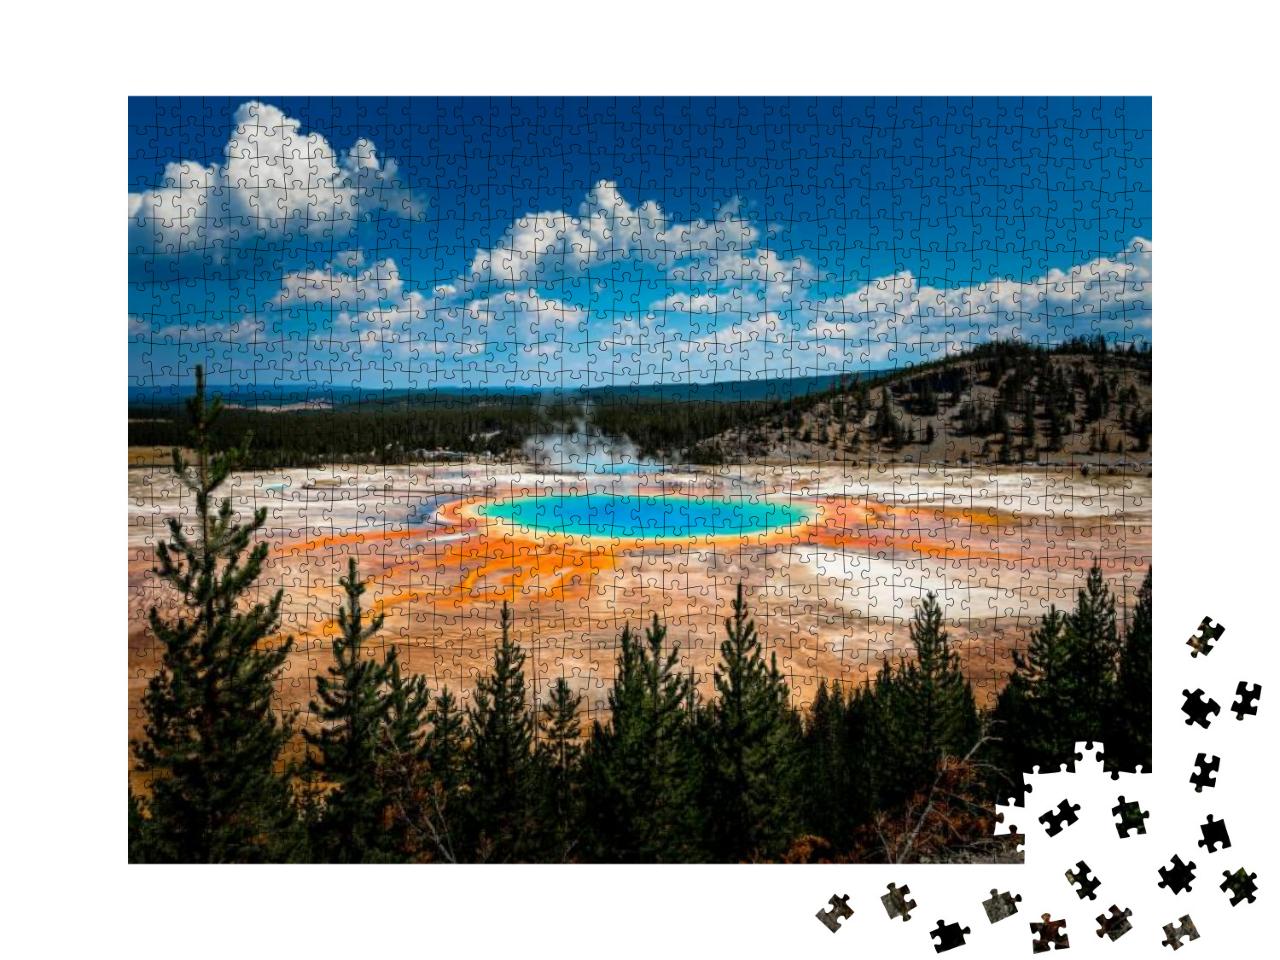 Grand Prismatic Spring View At Yellowstone National Park... Jigsaw Puzzle with 1000 pieces